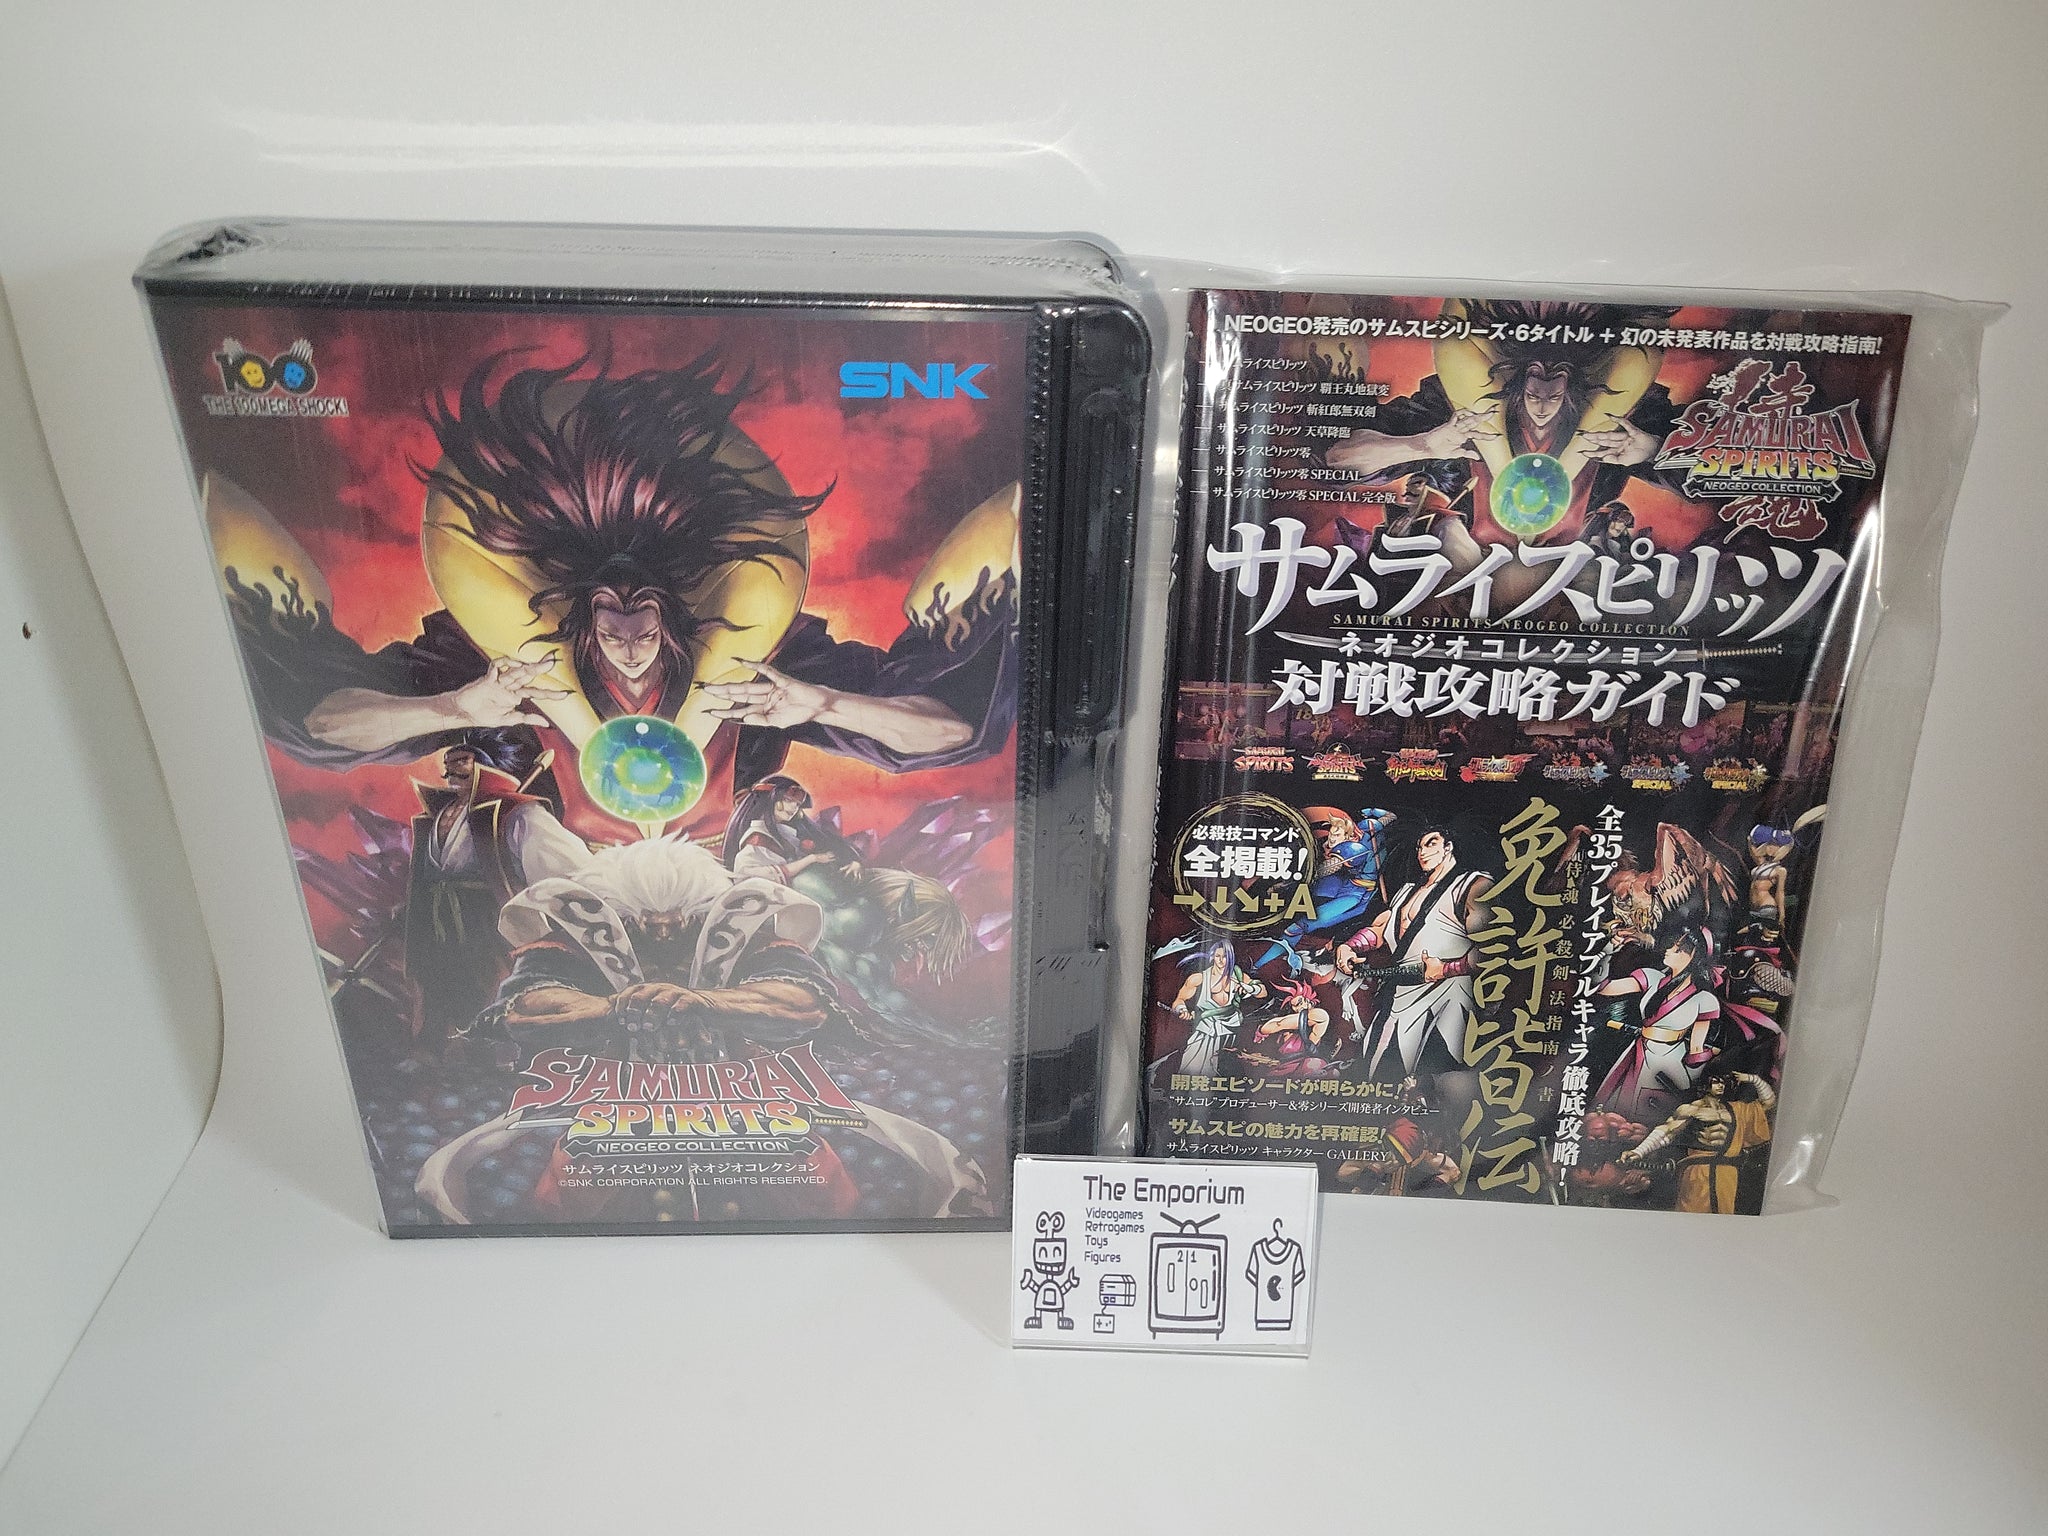 Samurai Spirits NEOGEO Collection [Limited Edition Pack] + Guide